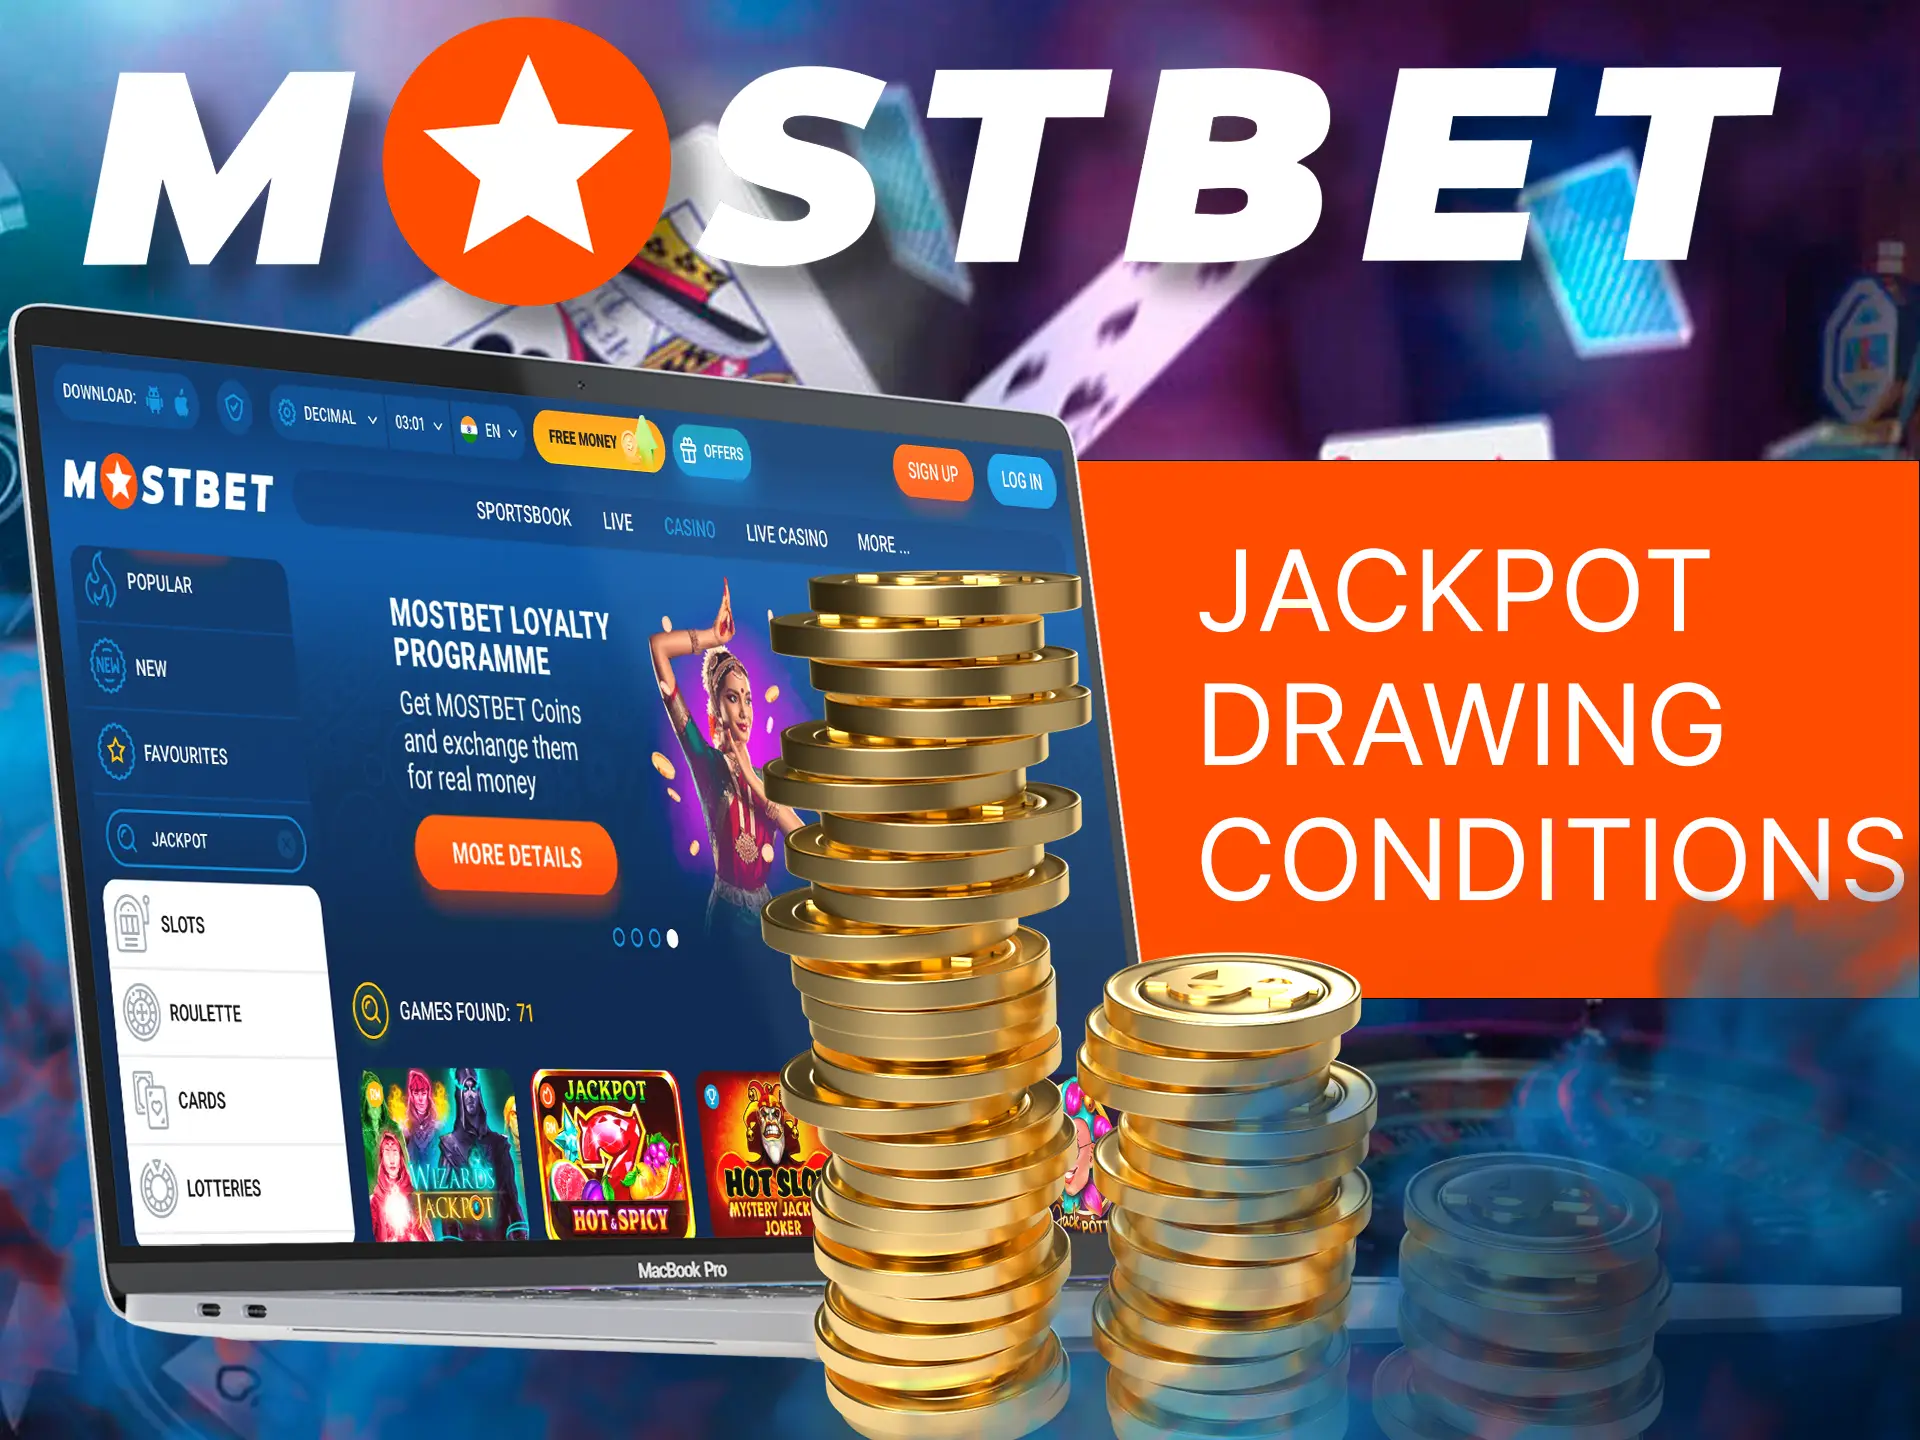 It is useful for every player to know what additional terms and conditions apply on the Mostbet platform.